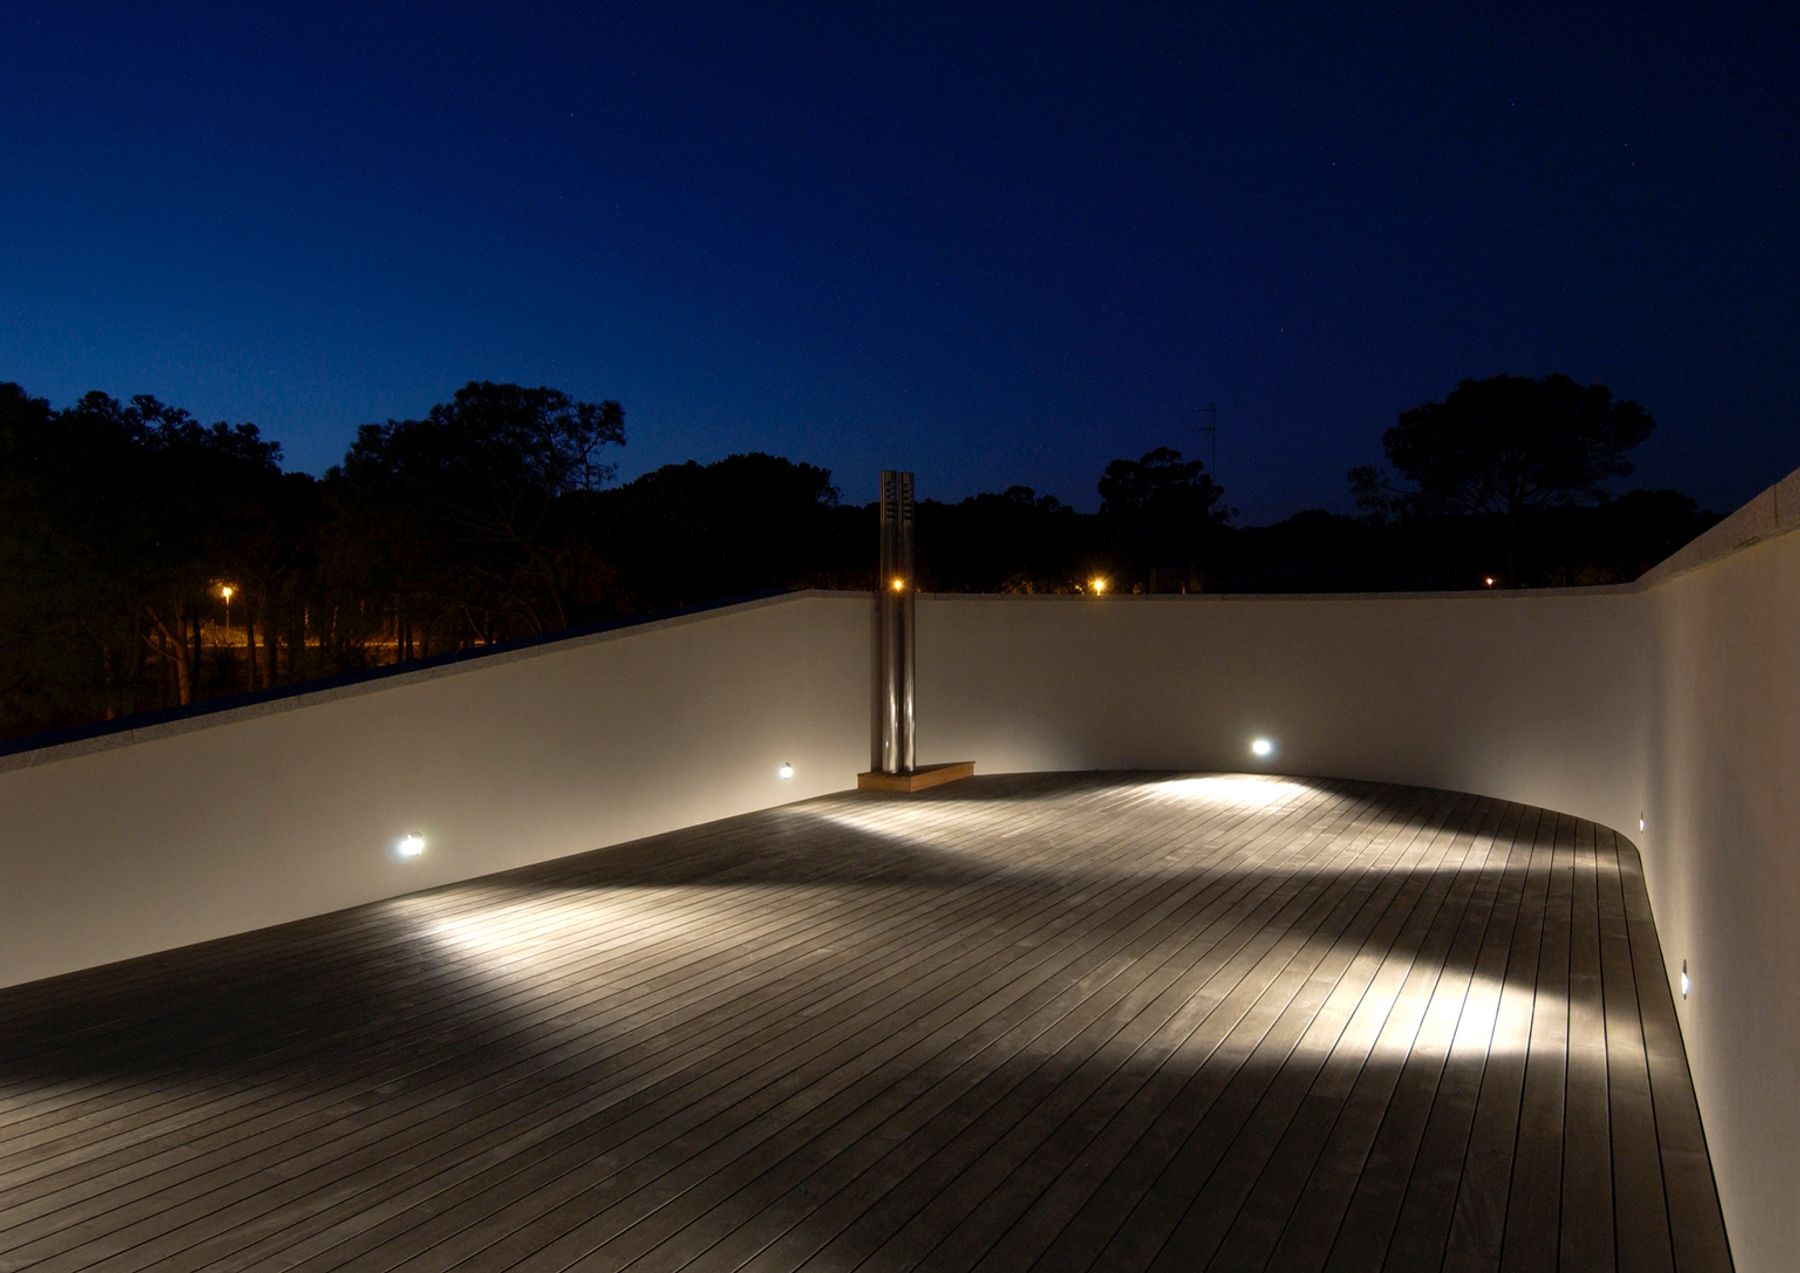 Private residence in Palamós. Architecture and lighting design: Jordi Garcés, Barcelona.